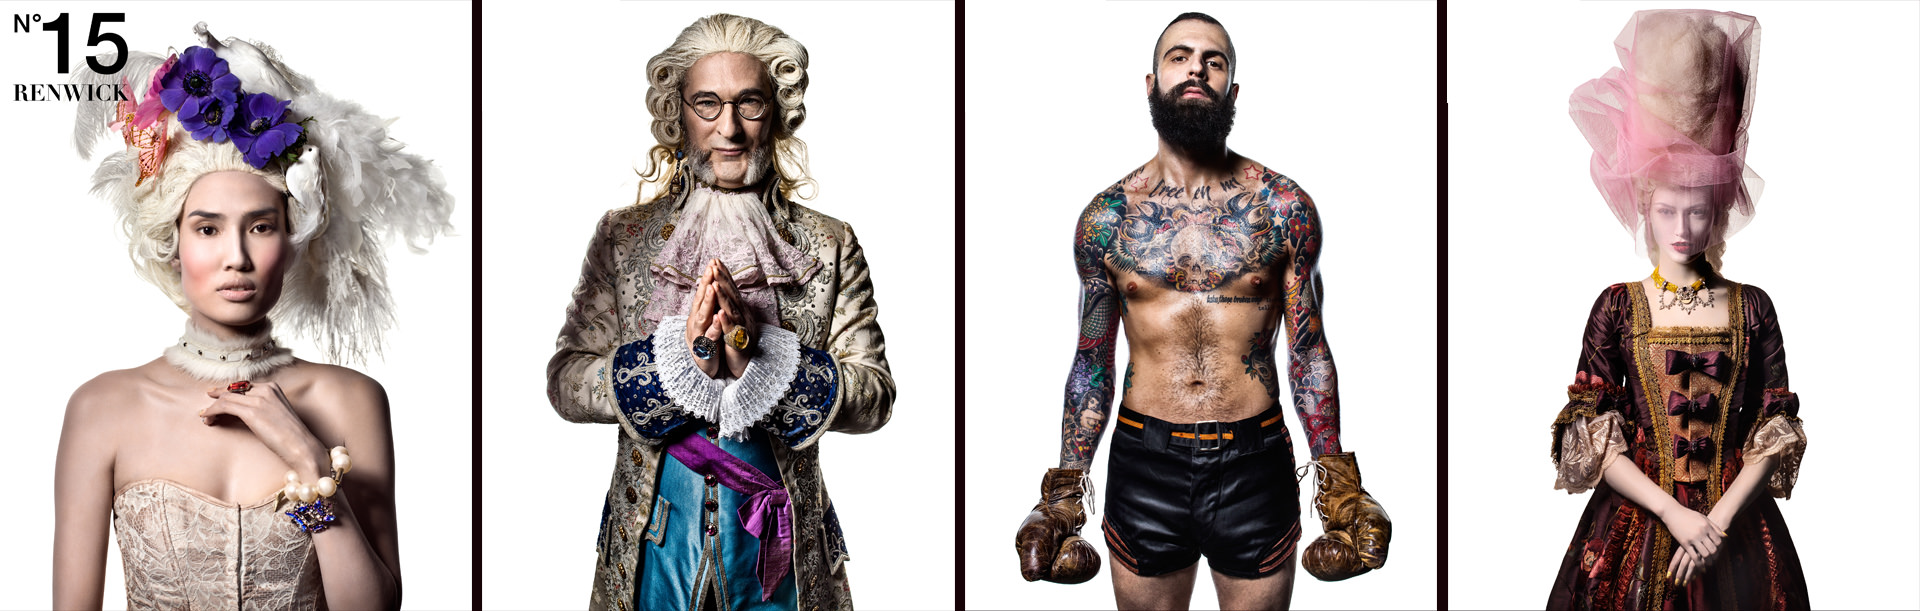 Characters : Final Portraits (photography by Henry Leutwyler)